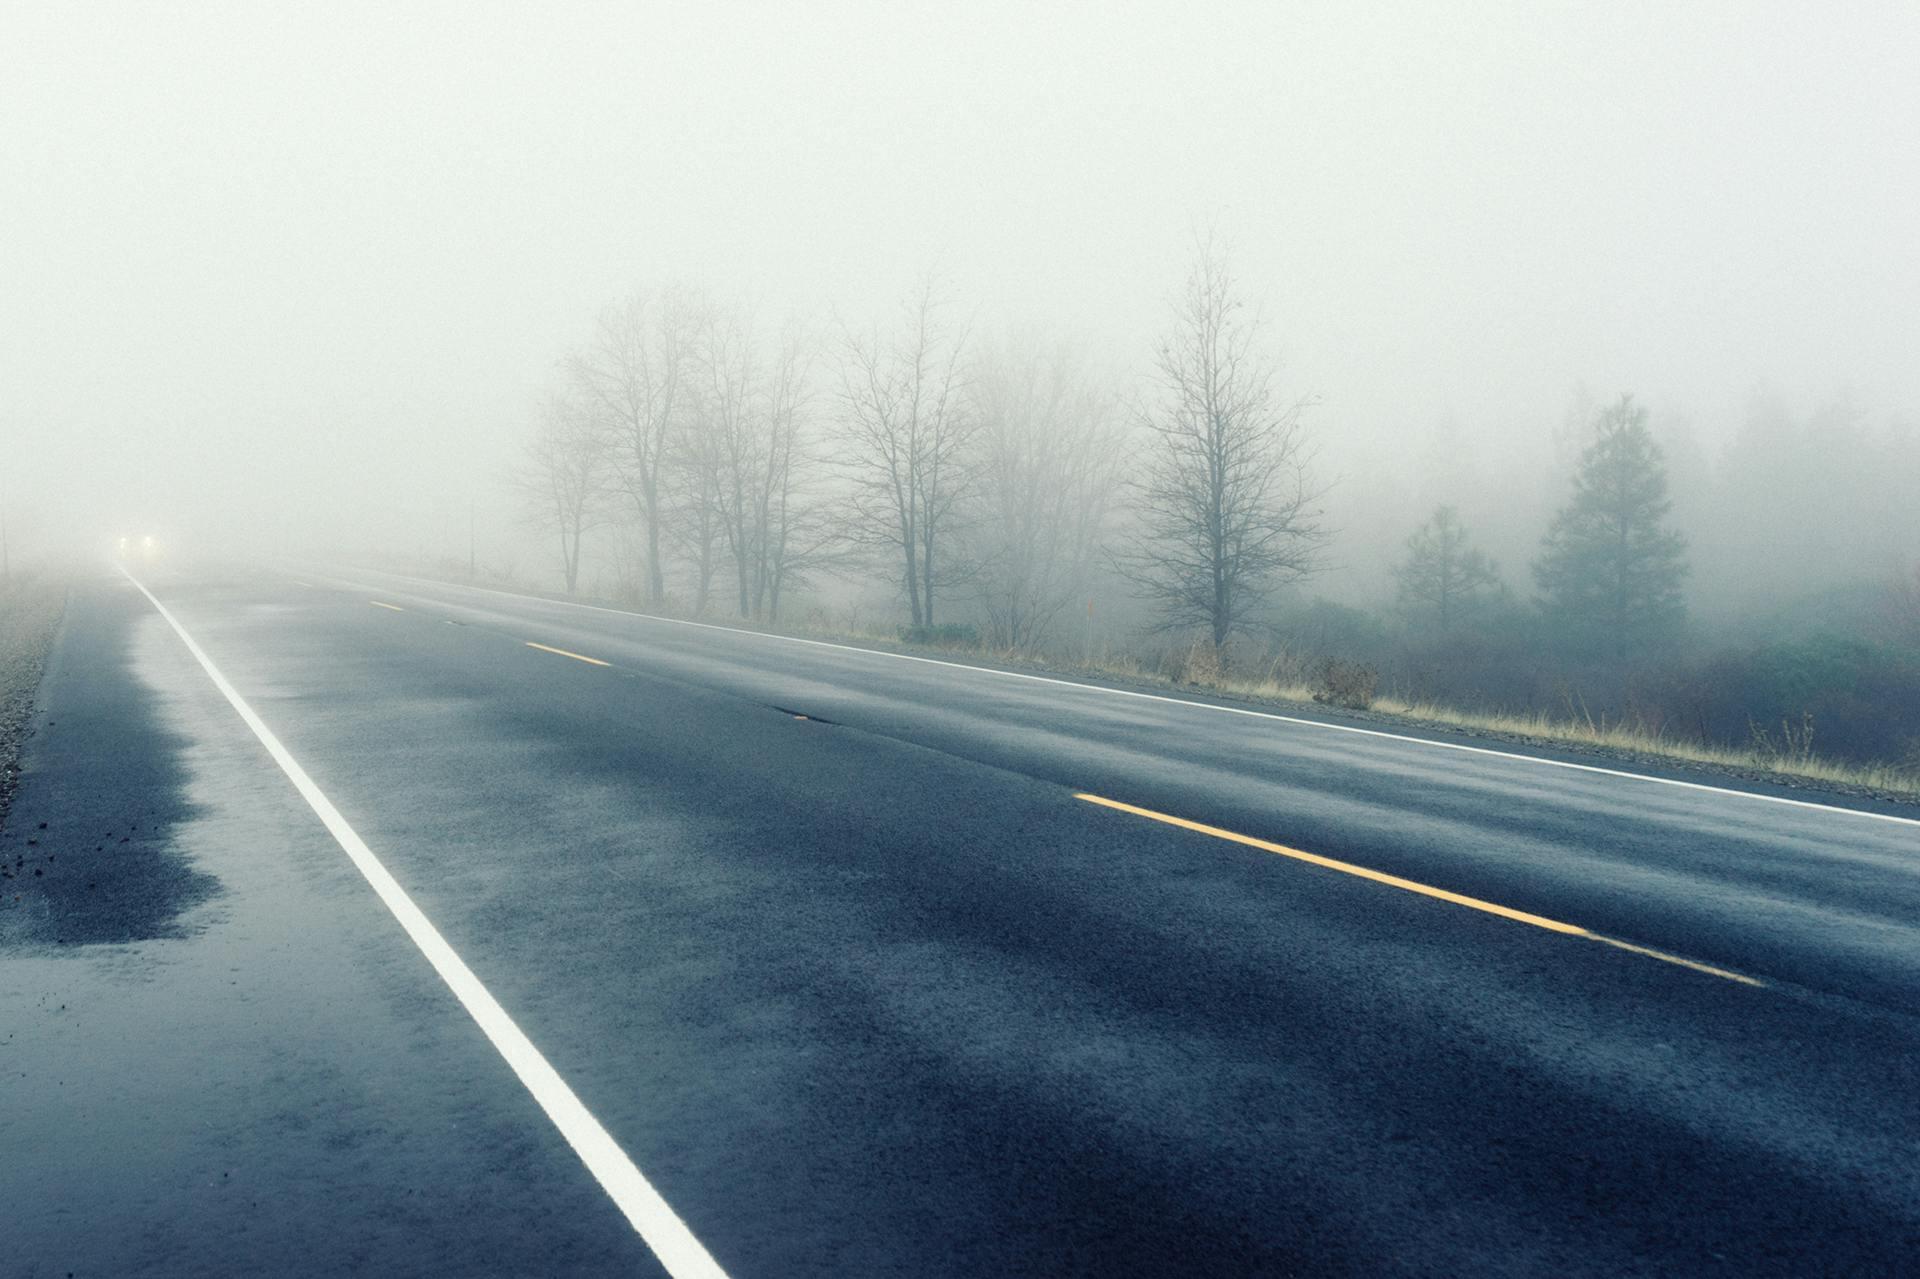 Grey Concrete Road Covered by Fogs · Free Stock Photo